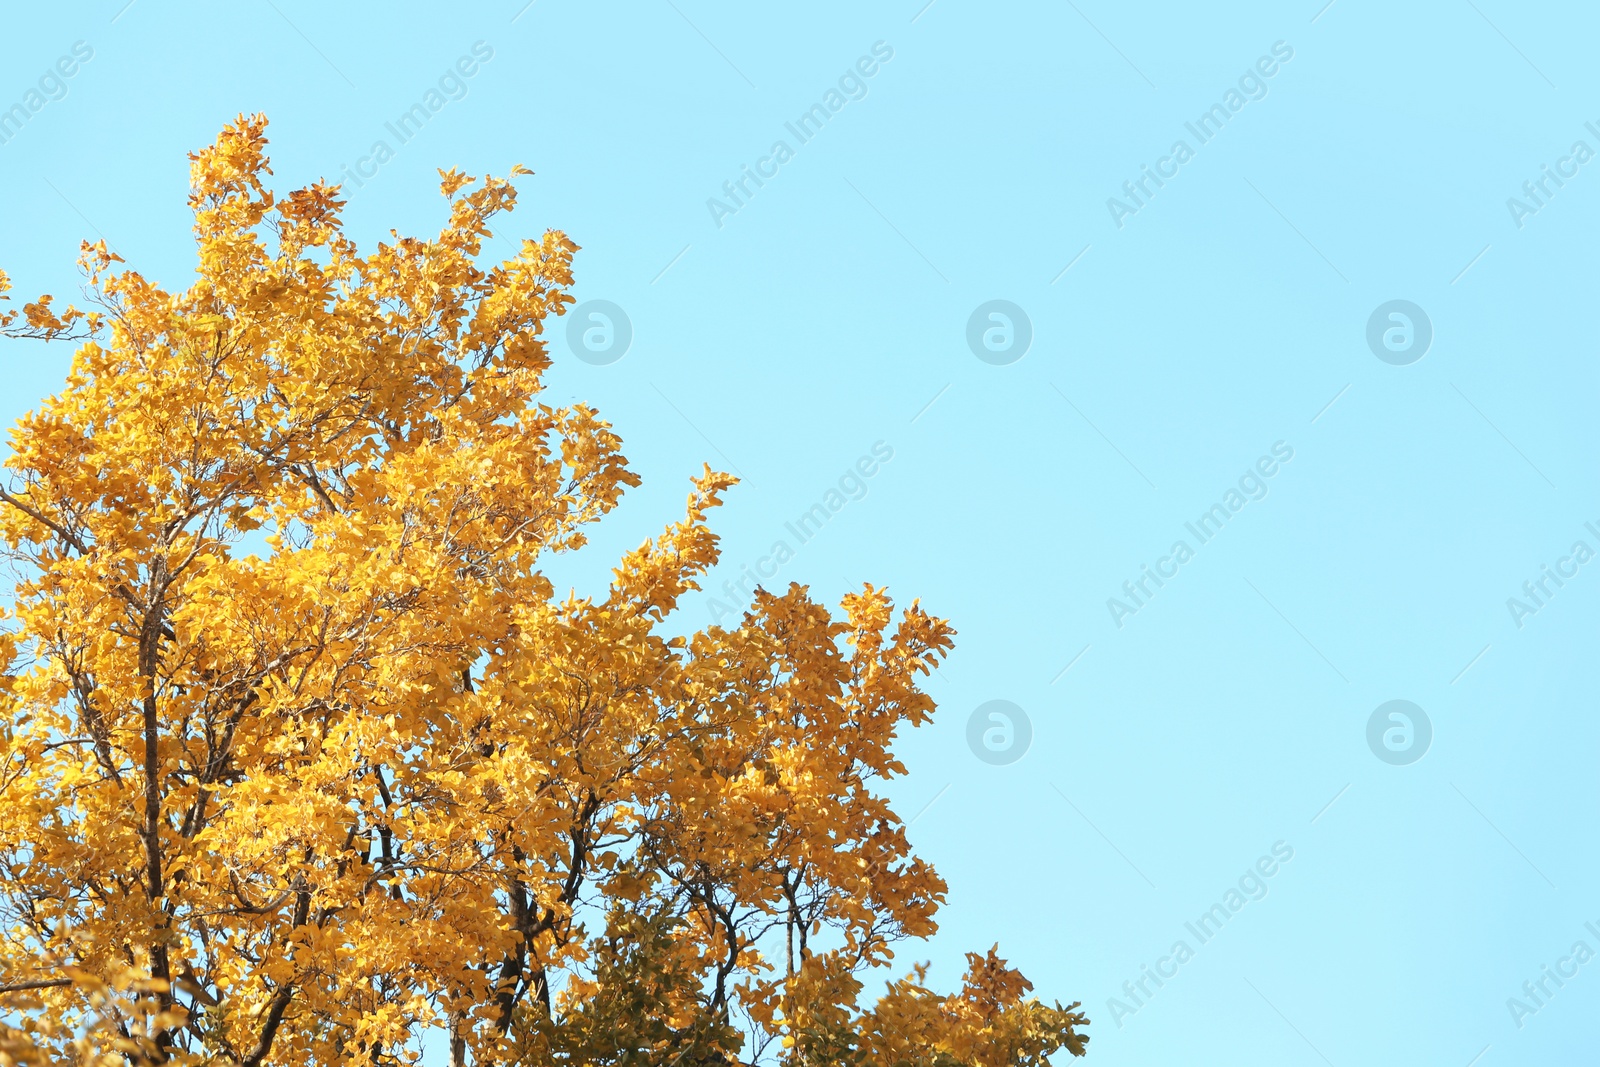 Photo of Tree with golden leaves against blue sky. Autumn sunny day